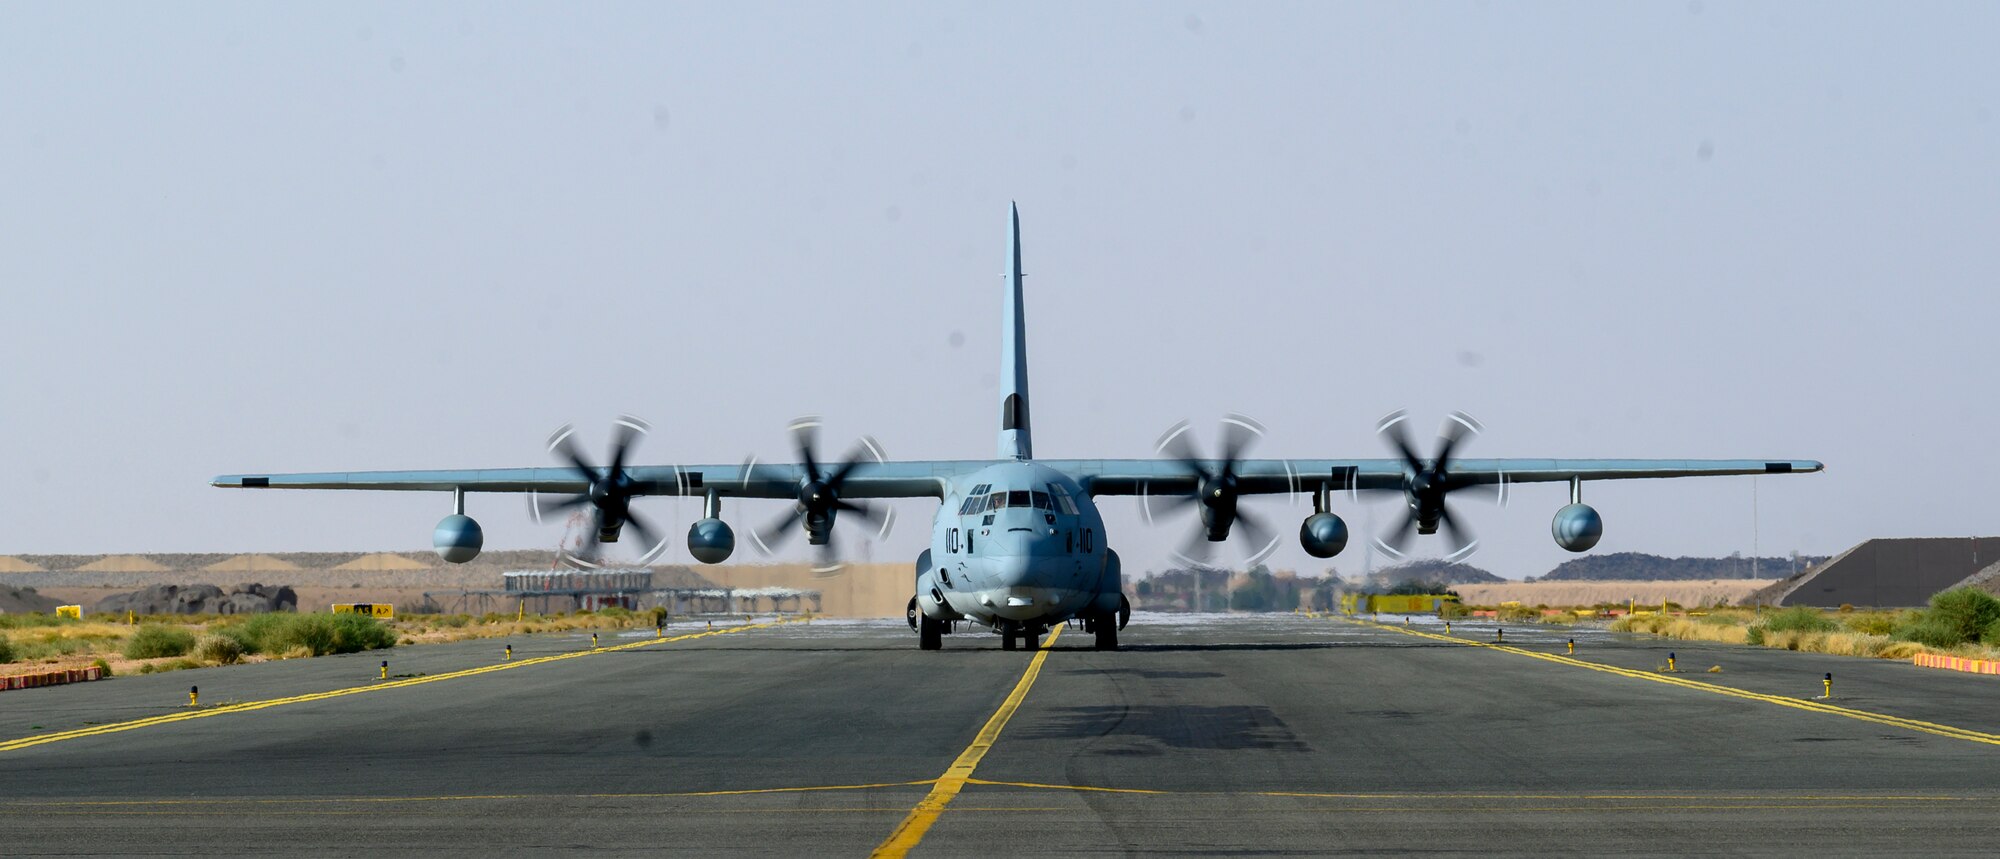 A U.S. Marine Corps KC-130J Hercules taxis upon arrival at a forward location for a “hot pit” aircraft-to-aircraft refueling of two U.S Air Force F-16 Fighting Falcons during a counter unmanned aerial system integration mission with joint and Royal Saudi aircraft, Kingdom of Saudi Arabia, June 30, 2021. U.S. Air Forces Central aircraft regularly work with coalition and partner nations to test their collective counter-UAS capabilities to ensure the security and stability of regional airspace. (U.S. Air Force photo by Senior Airman Samuel Earick)